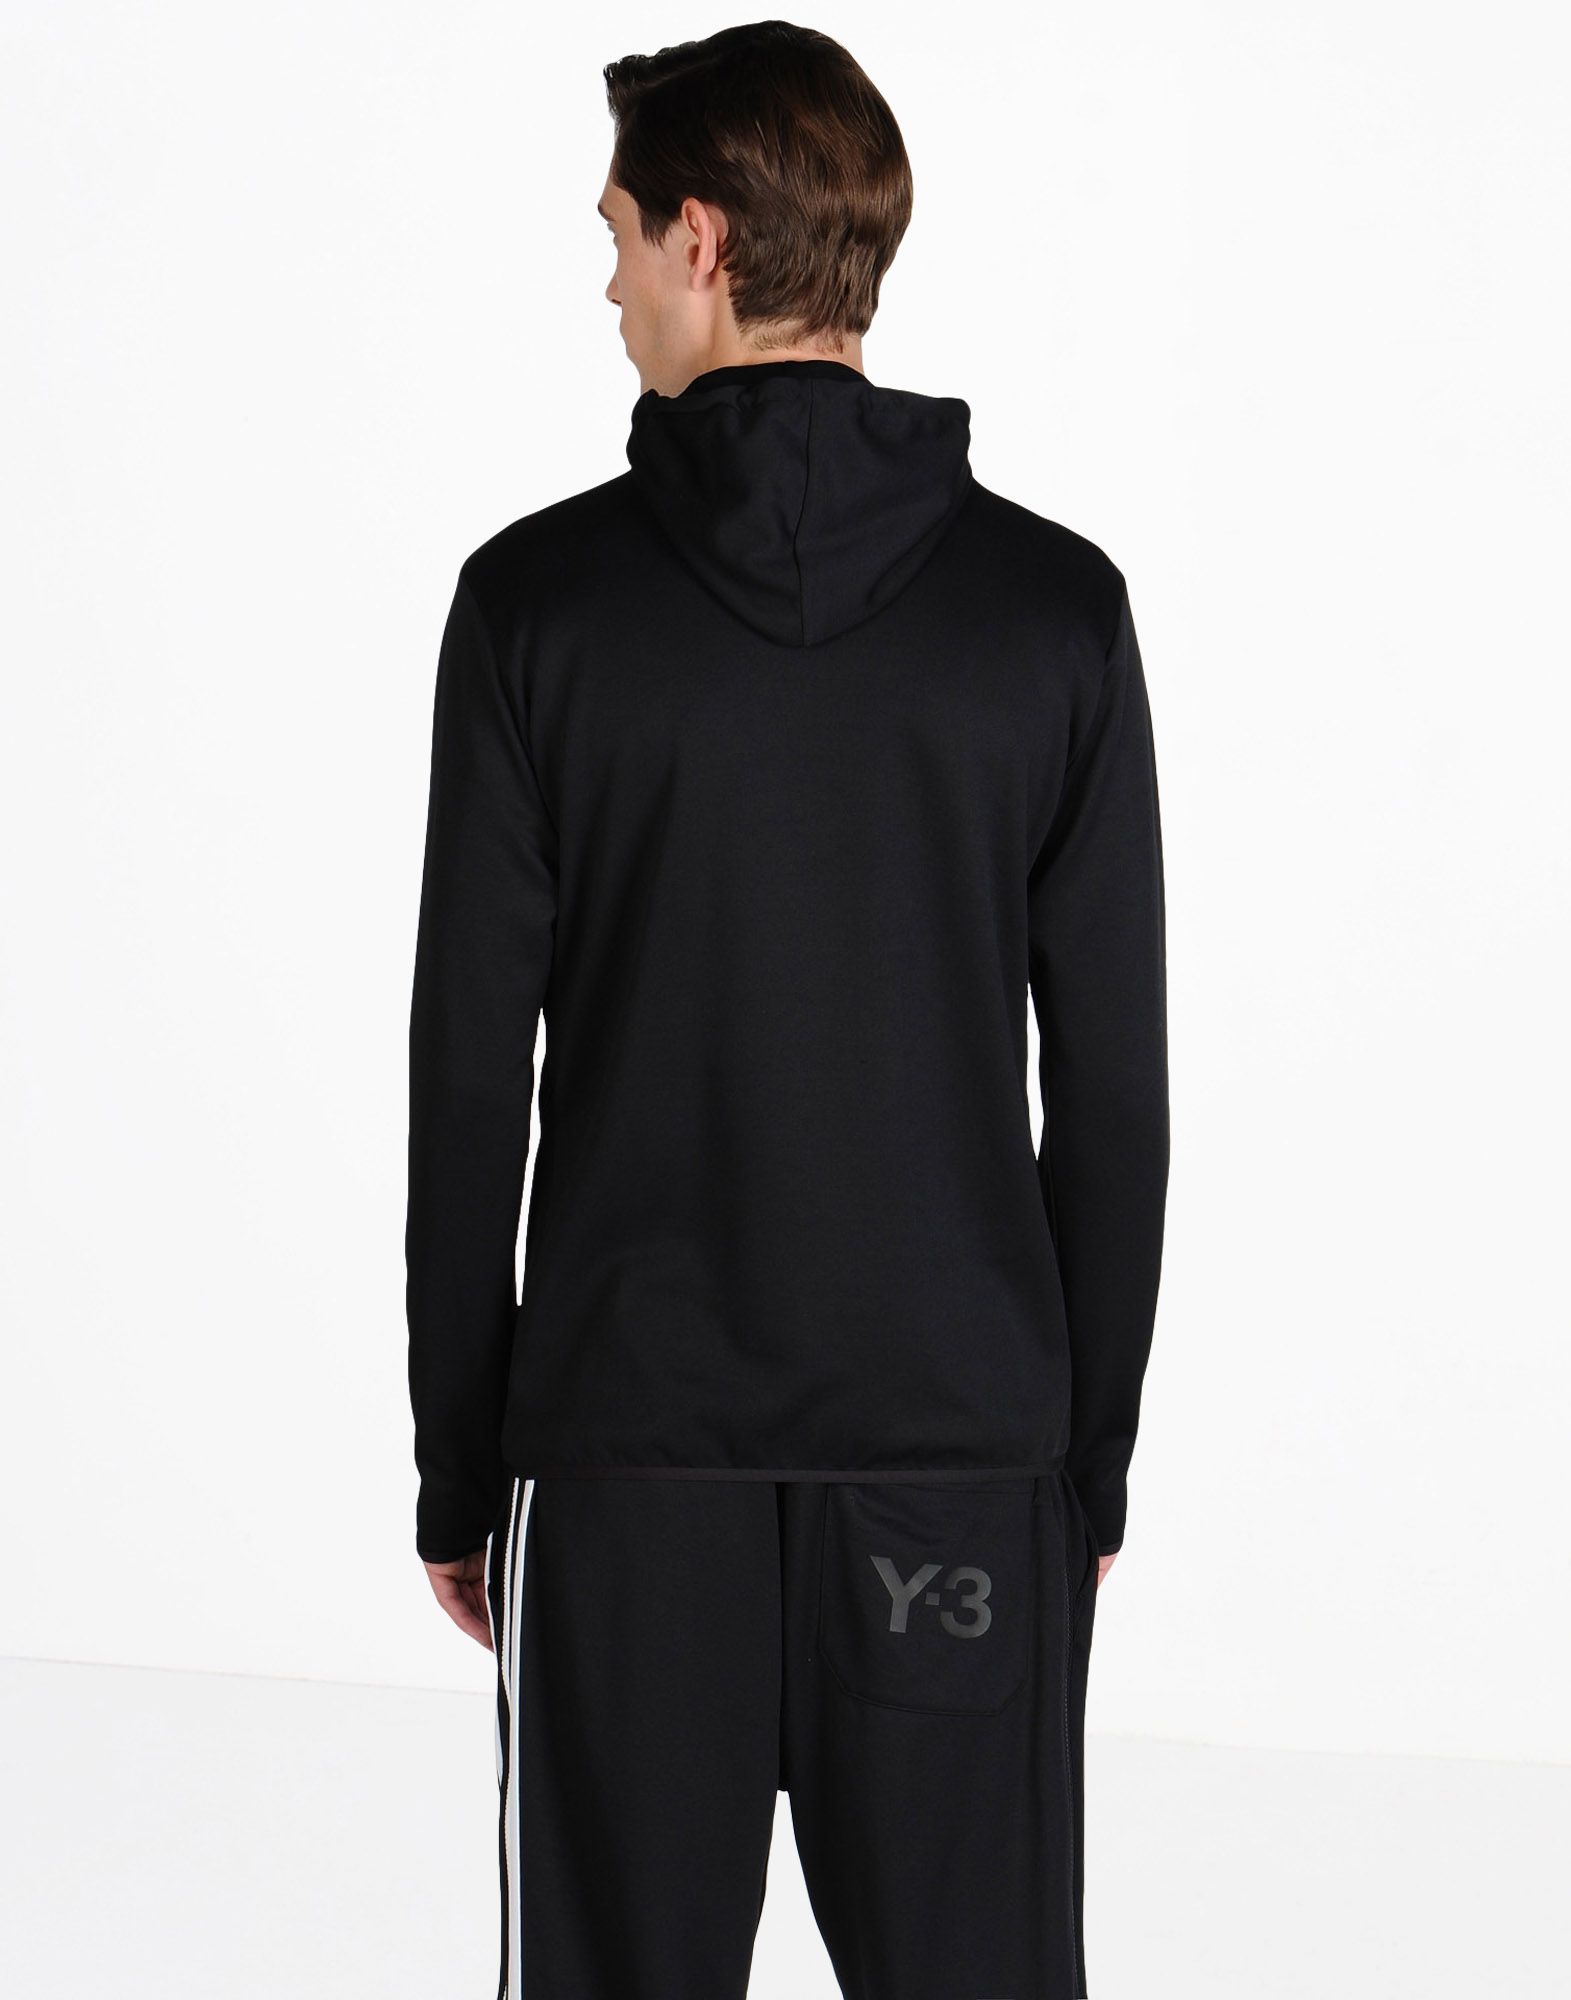 Y 3 3S TRACK HOODIE for Men | Adidas Y-3 Official Store